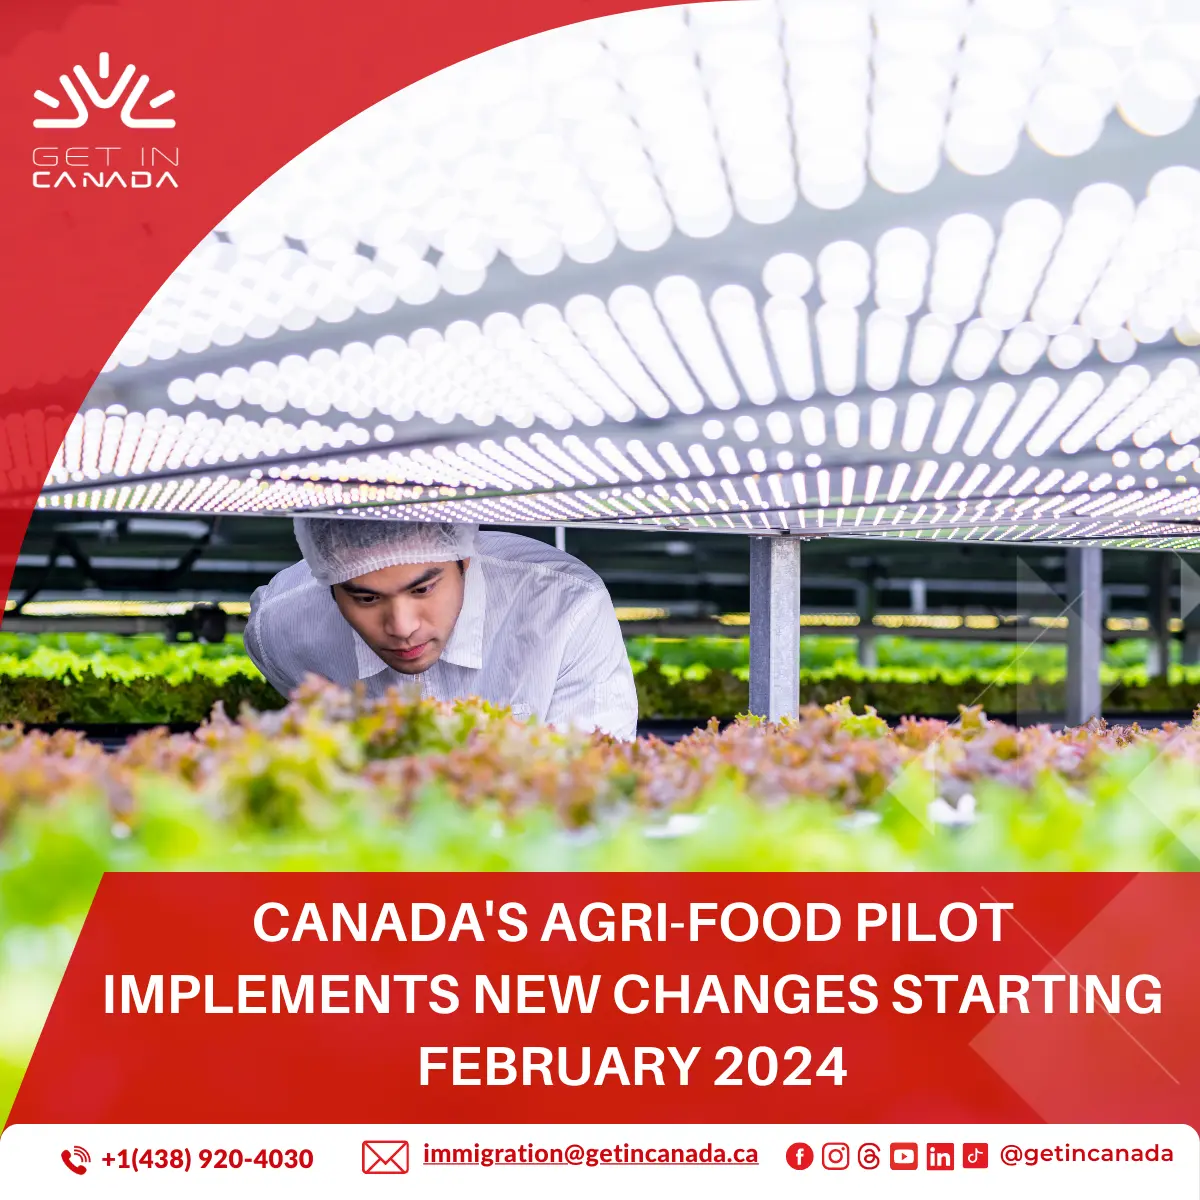 Canada's Agri-Food Pilot Implements New Changes Starting February 2024